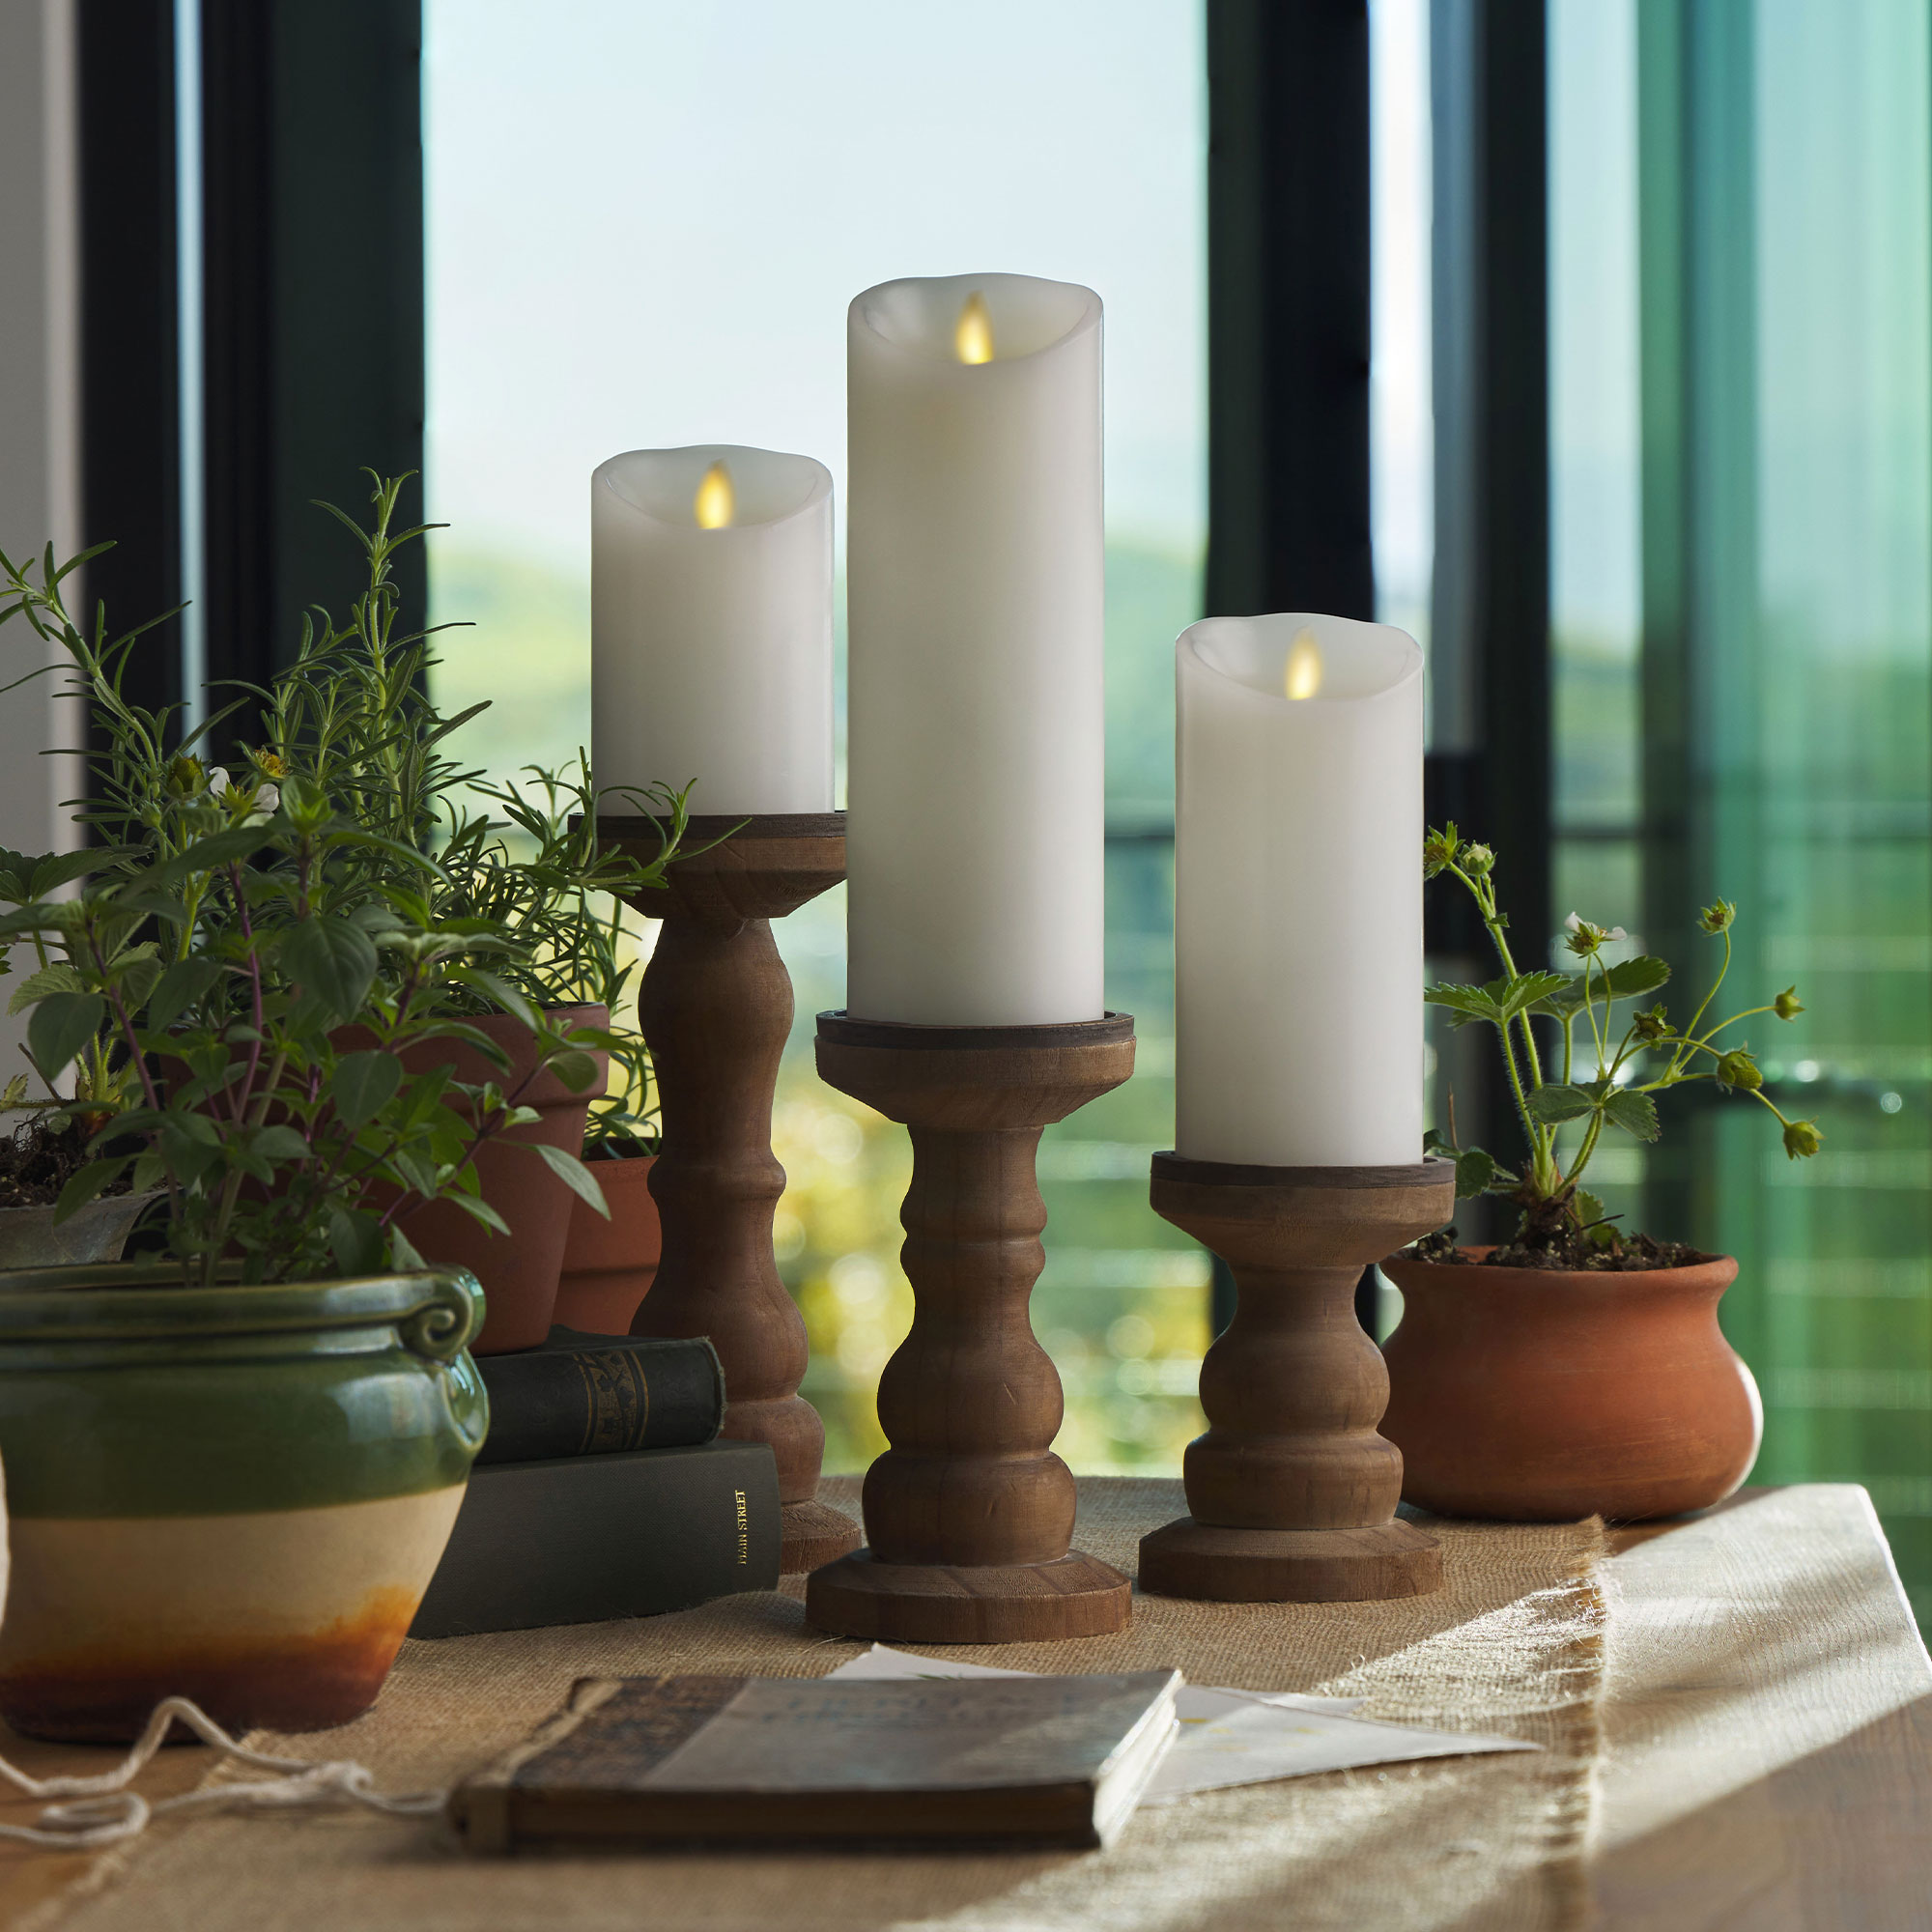 Flame-Effect　–　Luminara　White　with　Pillar　Flameless　Candle　Real